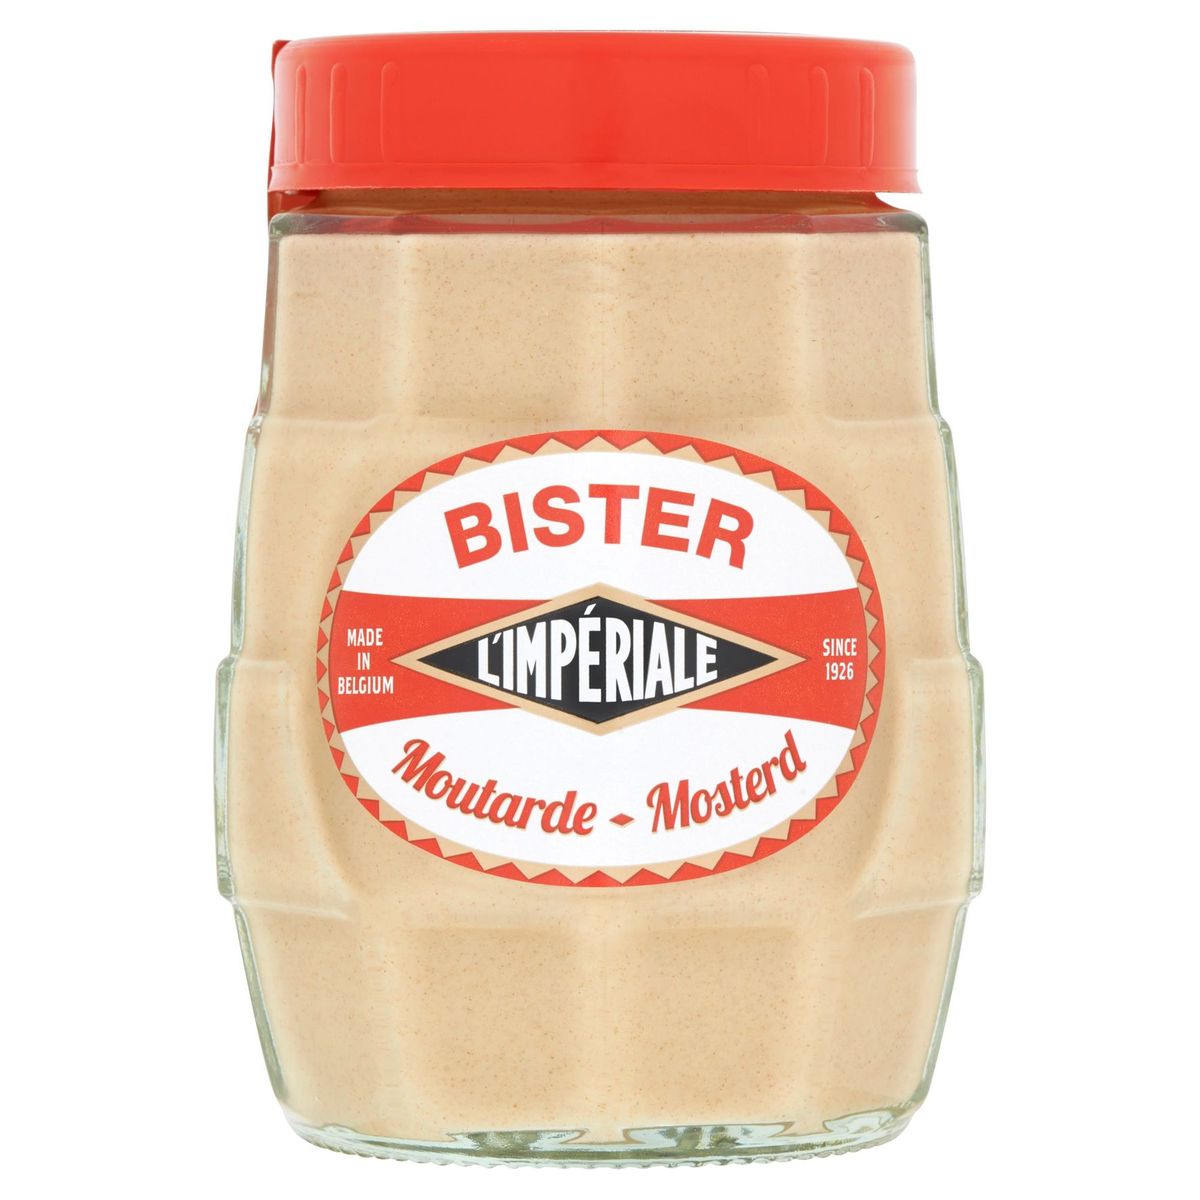 Bister L'Impériale Mosterd 250 g